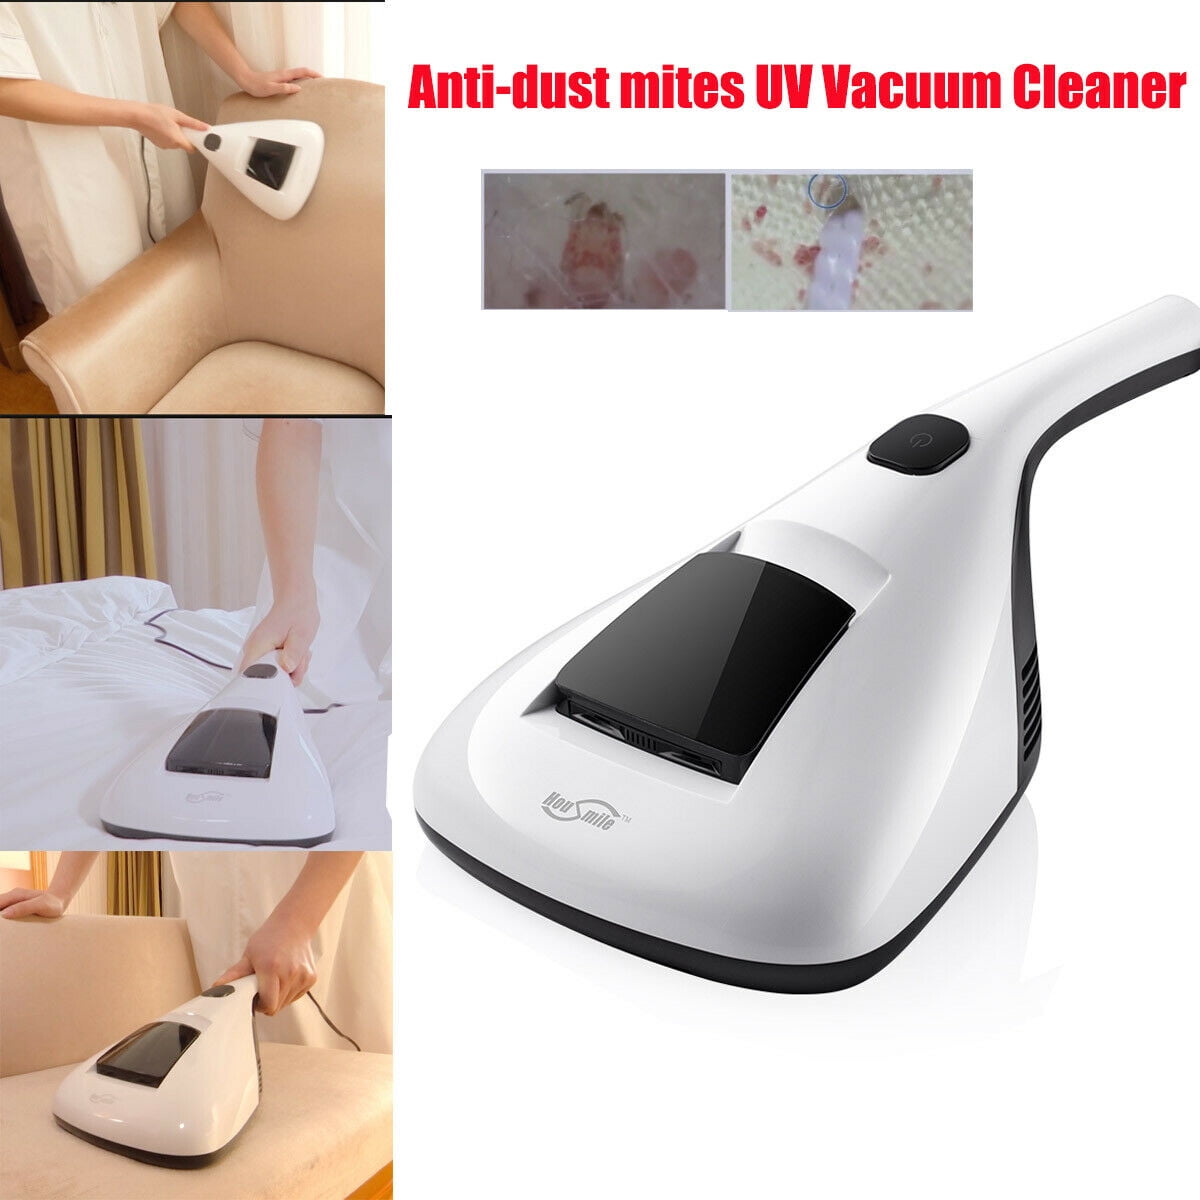 Pillows Handheld Vacuum Cleaner,UV Sterilizer Killing Bed Bugs Mite Removal Machine with Sterilization Function for Bed Sheets Mattresses Cloth Sofas Carpets of Allergens